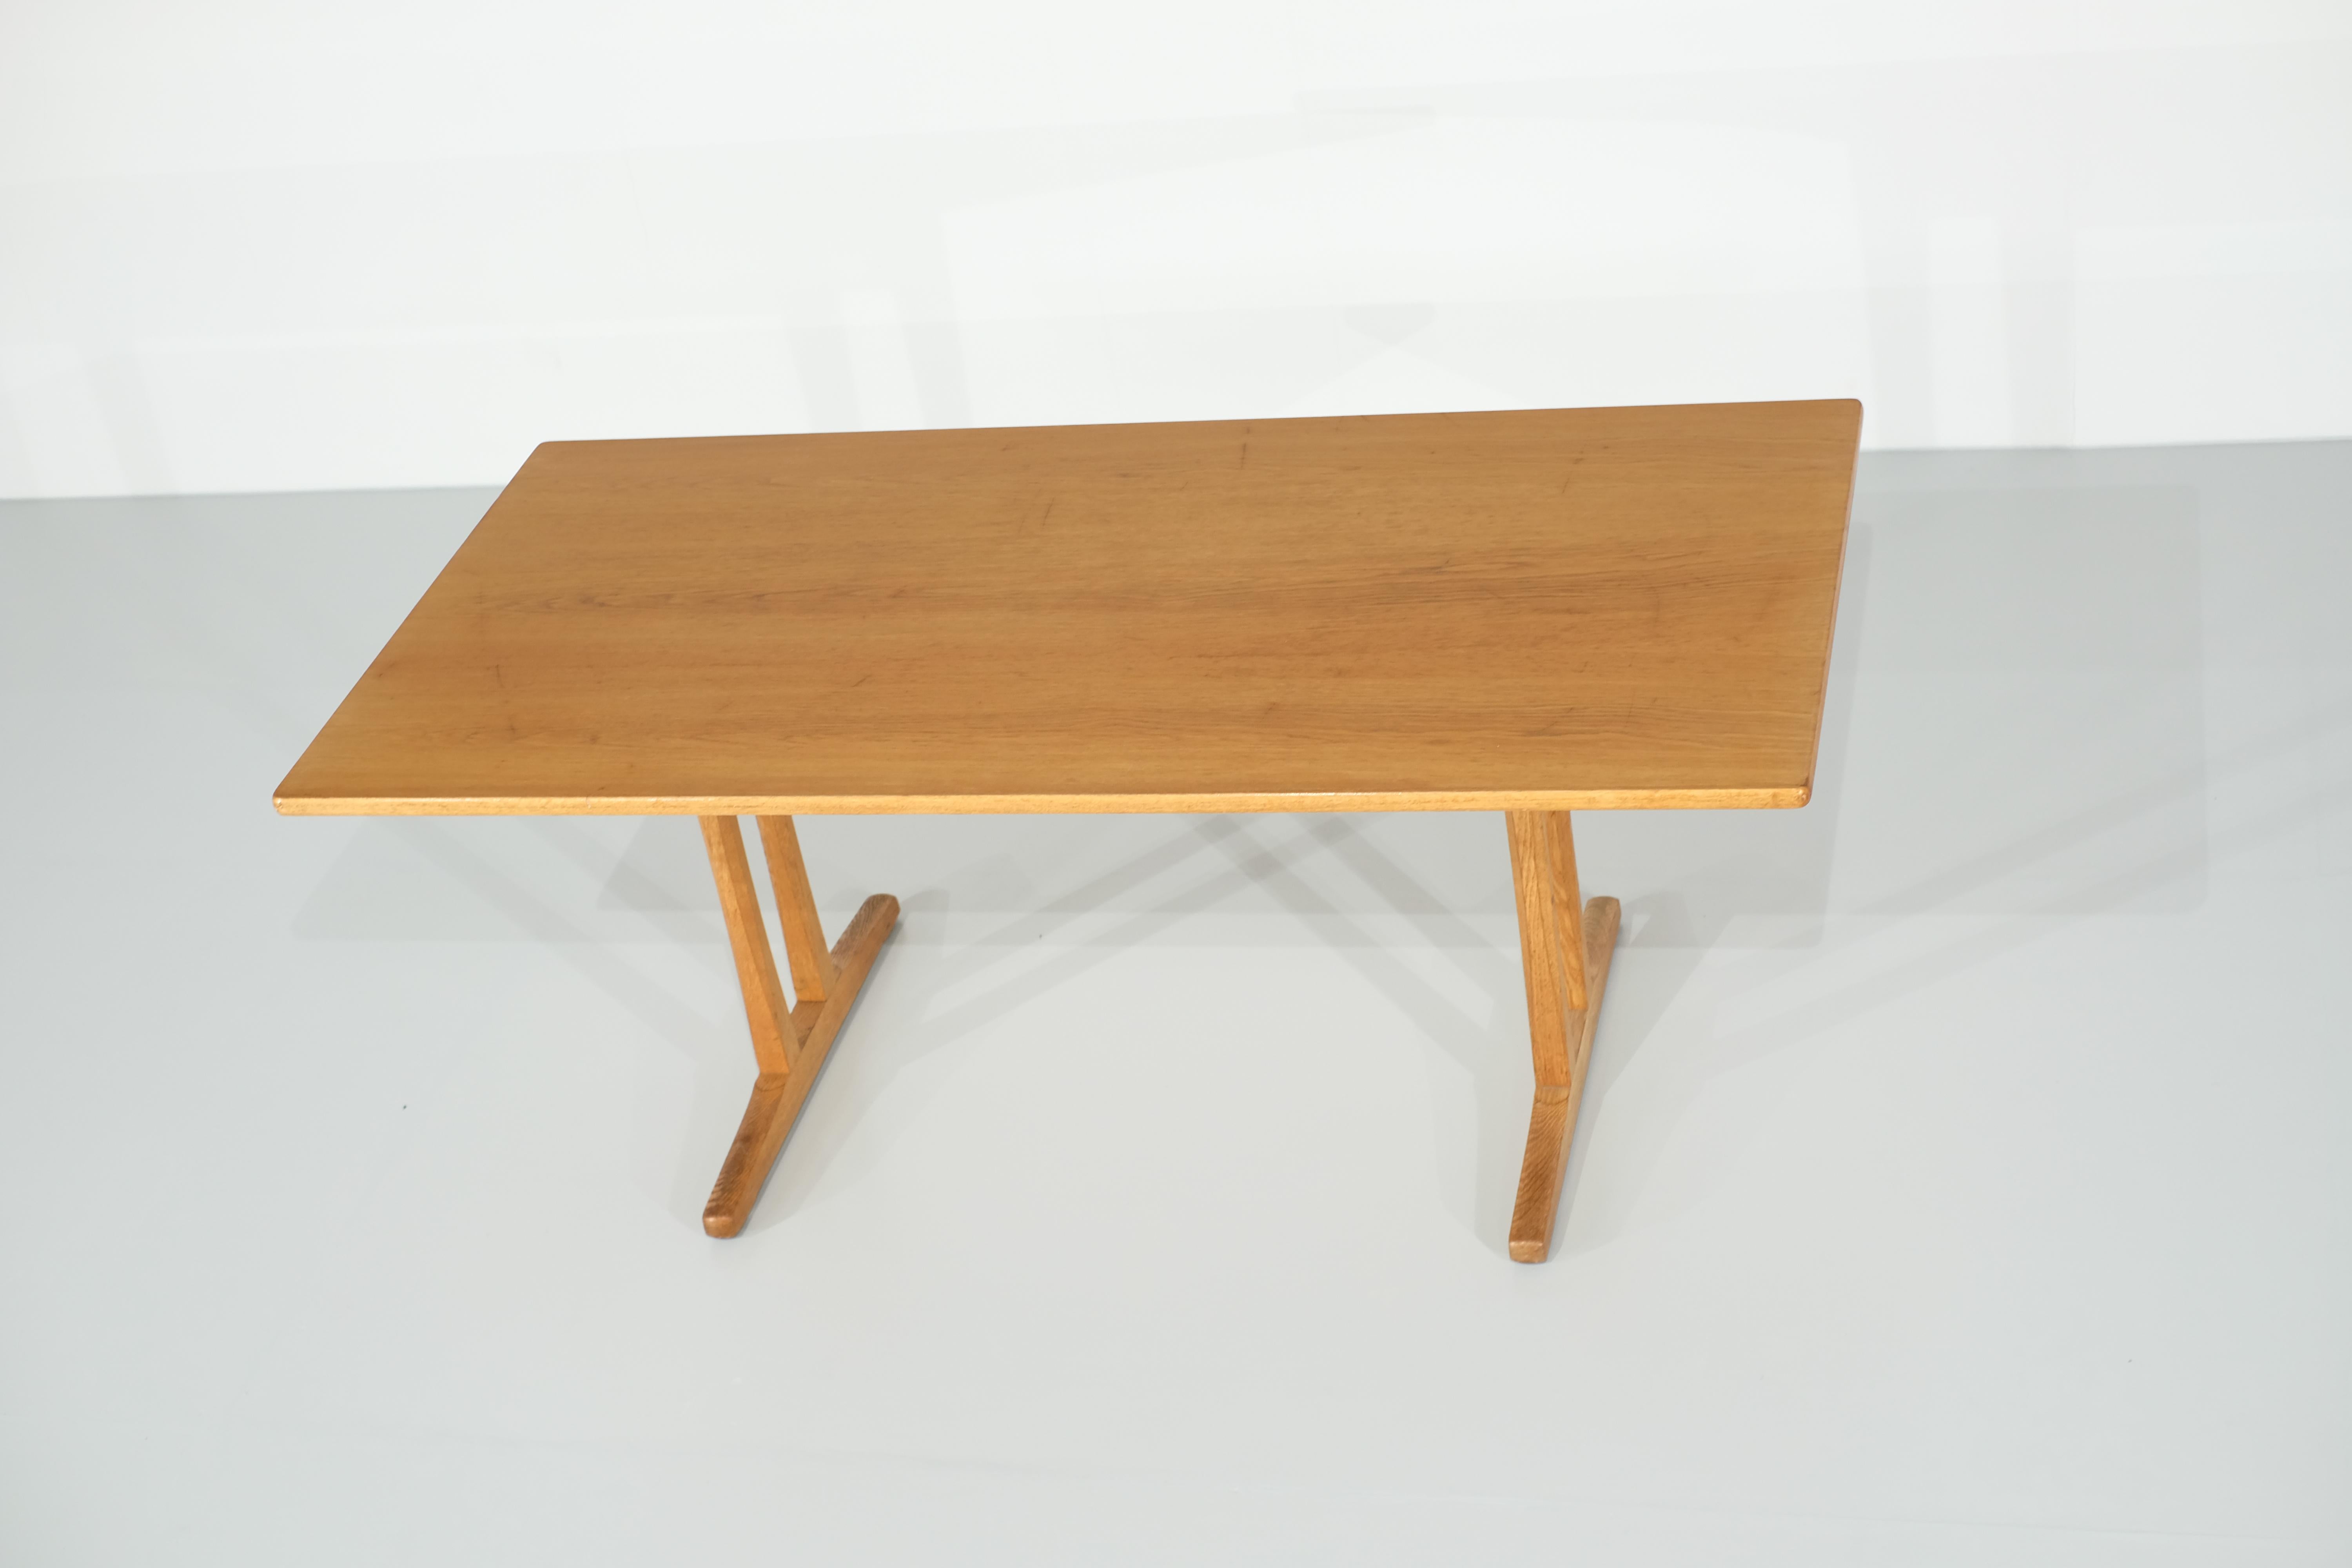 C18 Shaker table by Borge Mogensen for FDB Mobler - 1950s For Sale 6